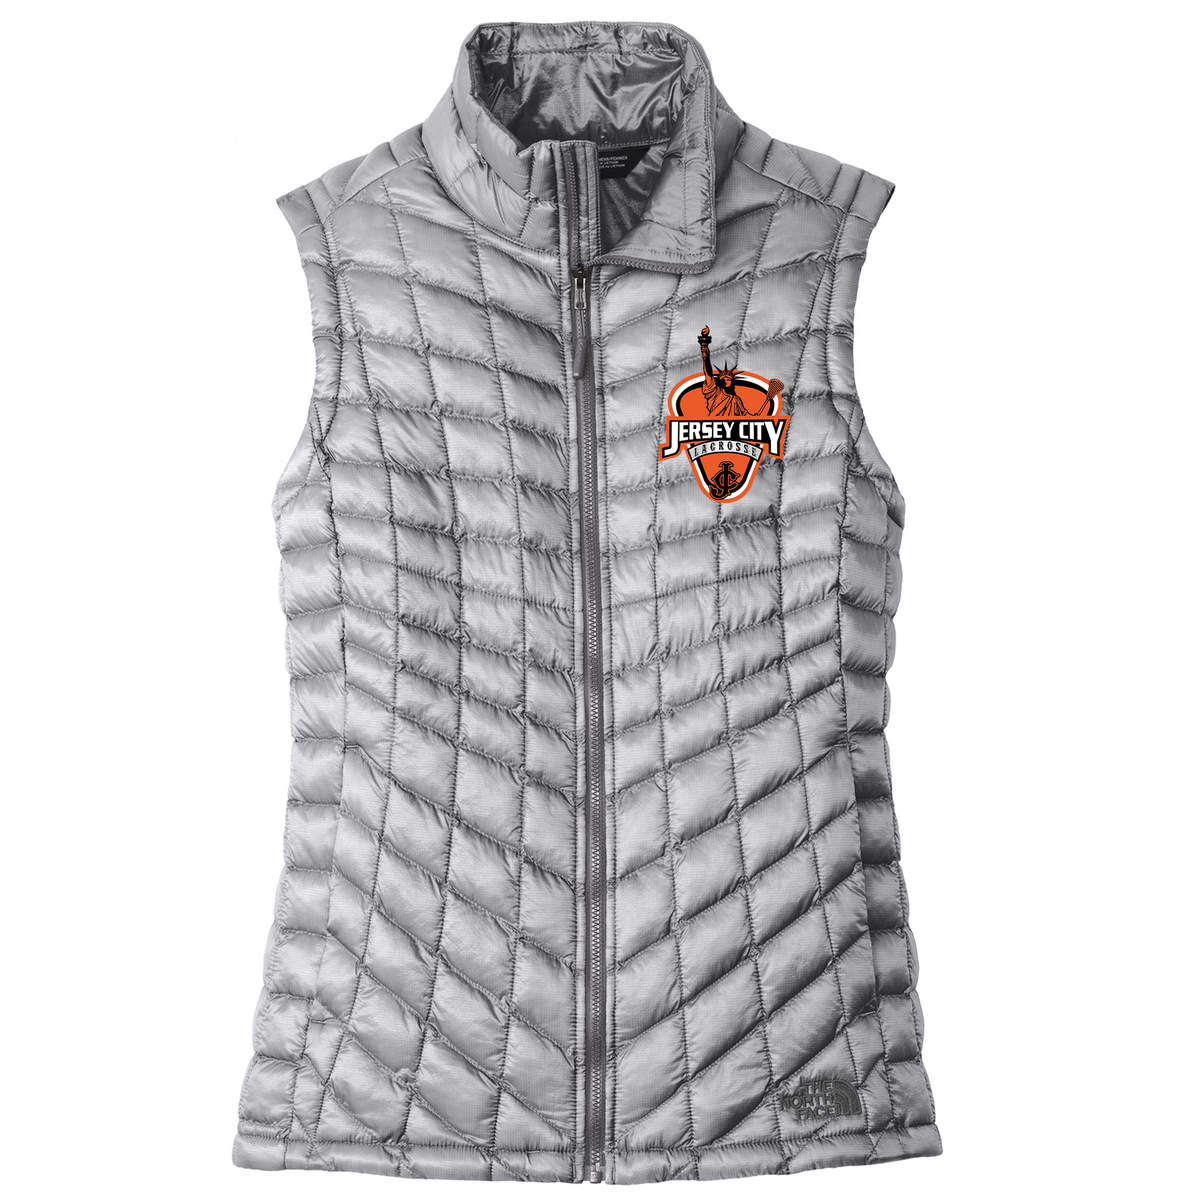 Jersey City Lacrosse The North Face Ladies Thermoball Vest